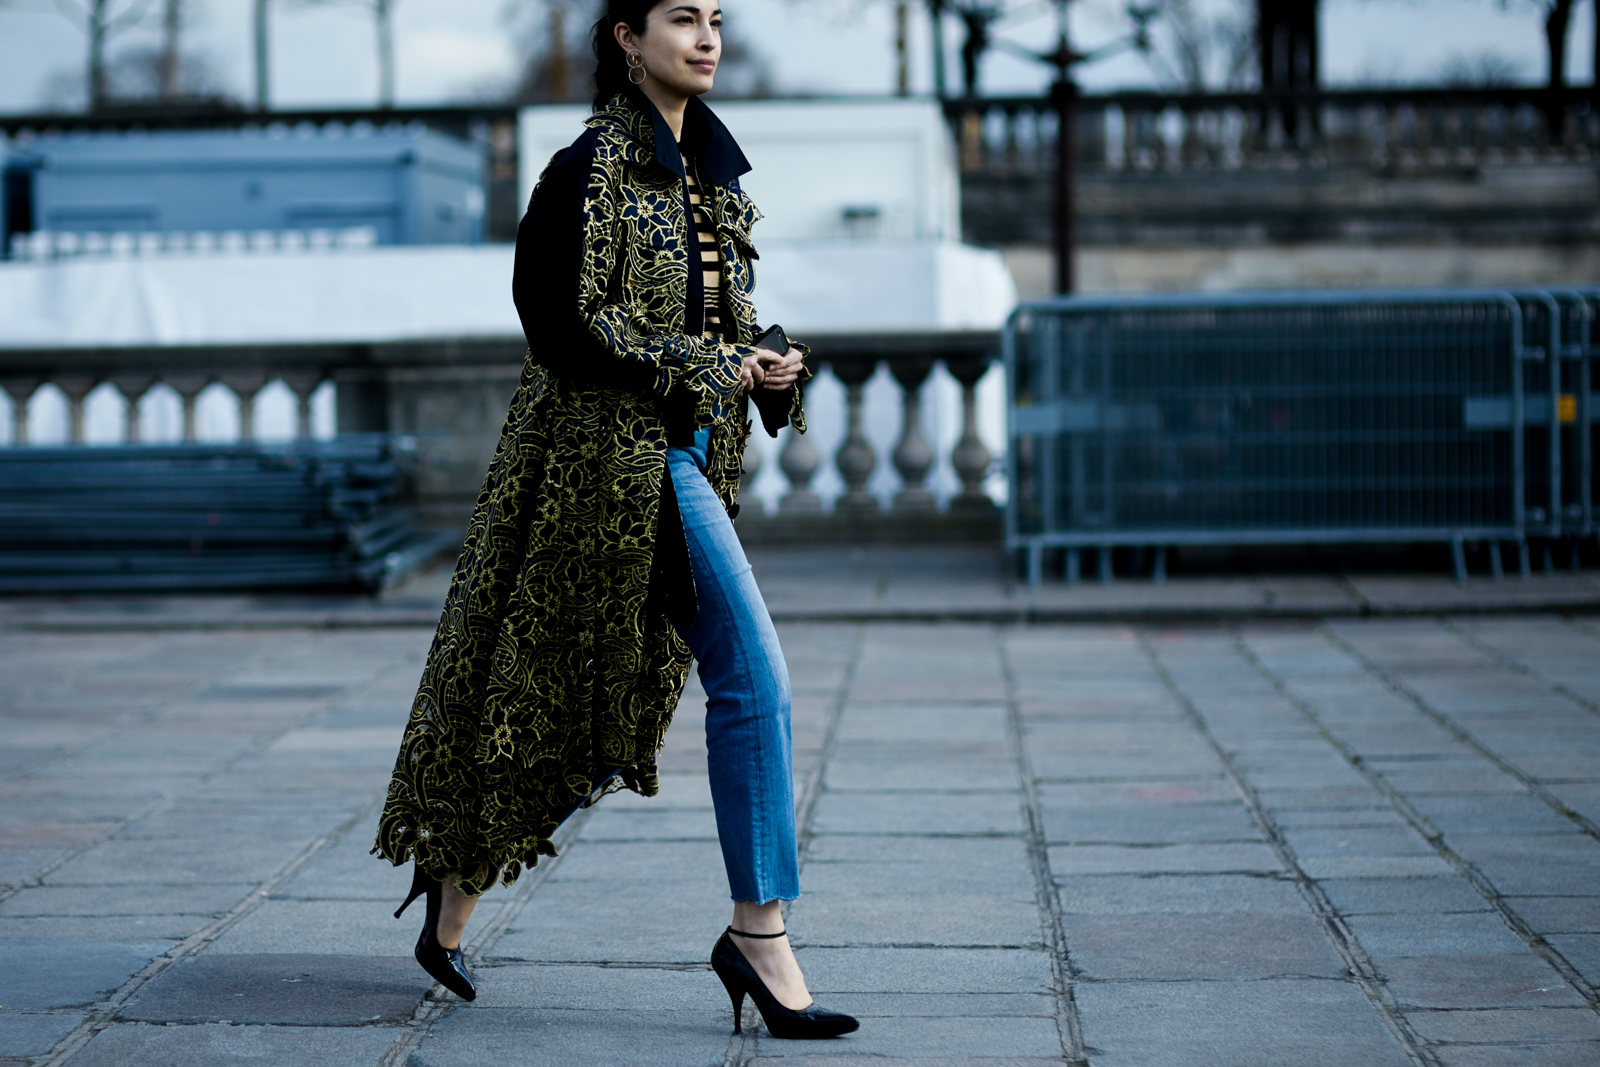 PFW Street Style: Caroline Issa wearing a Sacai coat and Mih jeans before the Valentino Fall/Winter 2016-2017 fashion show in Paris, France